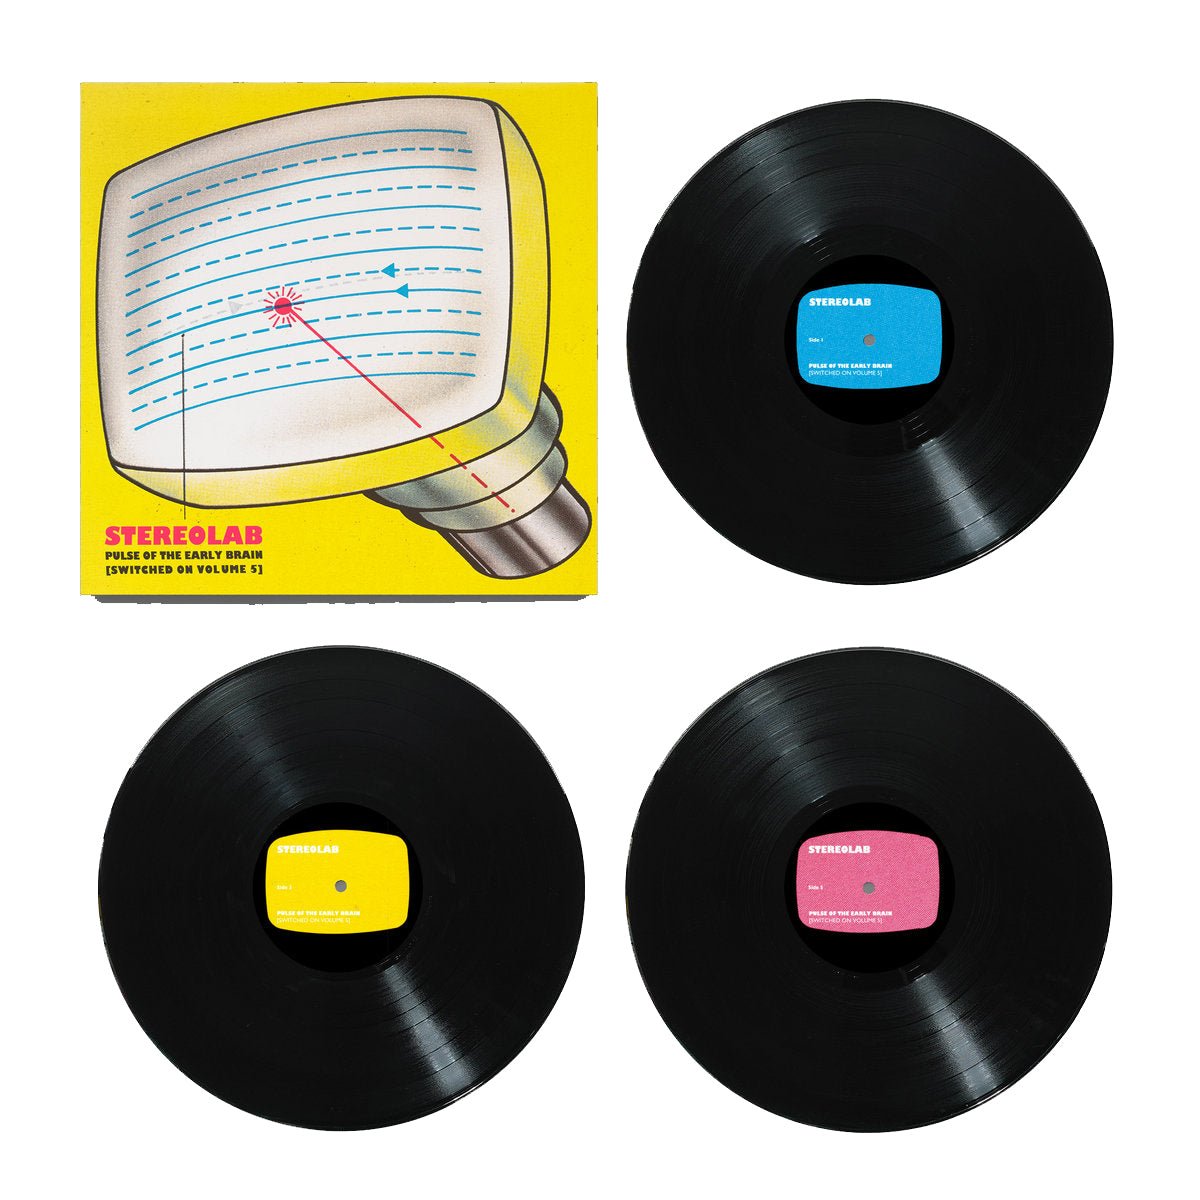 Stereolab - Pulse of the Early Brain: Switched On Volume 5 - Saint Marie Records